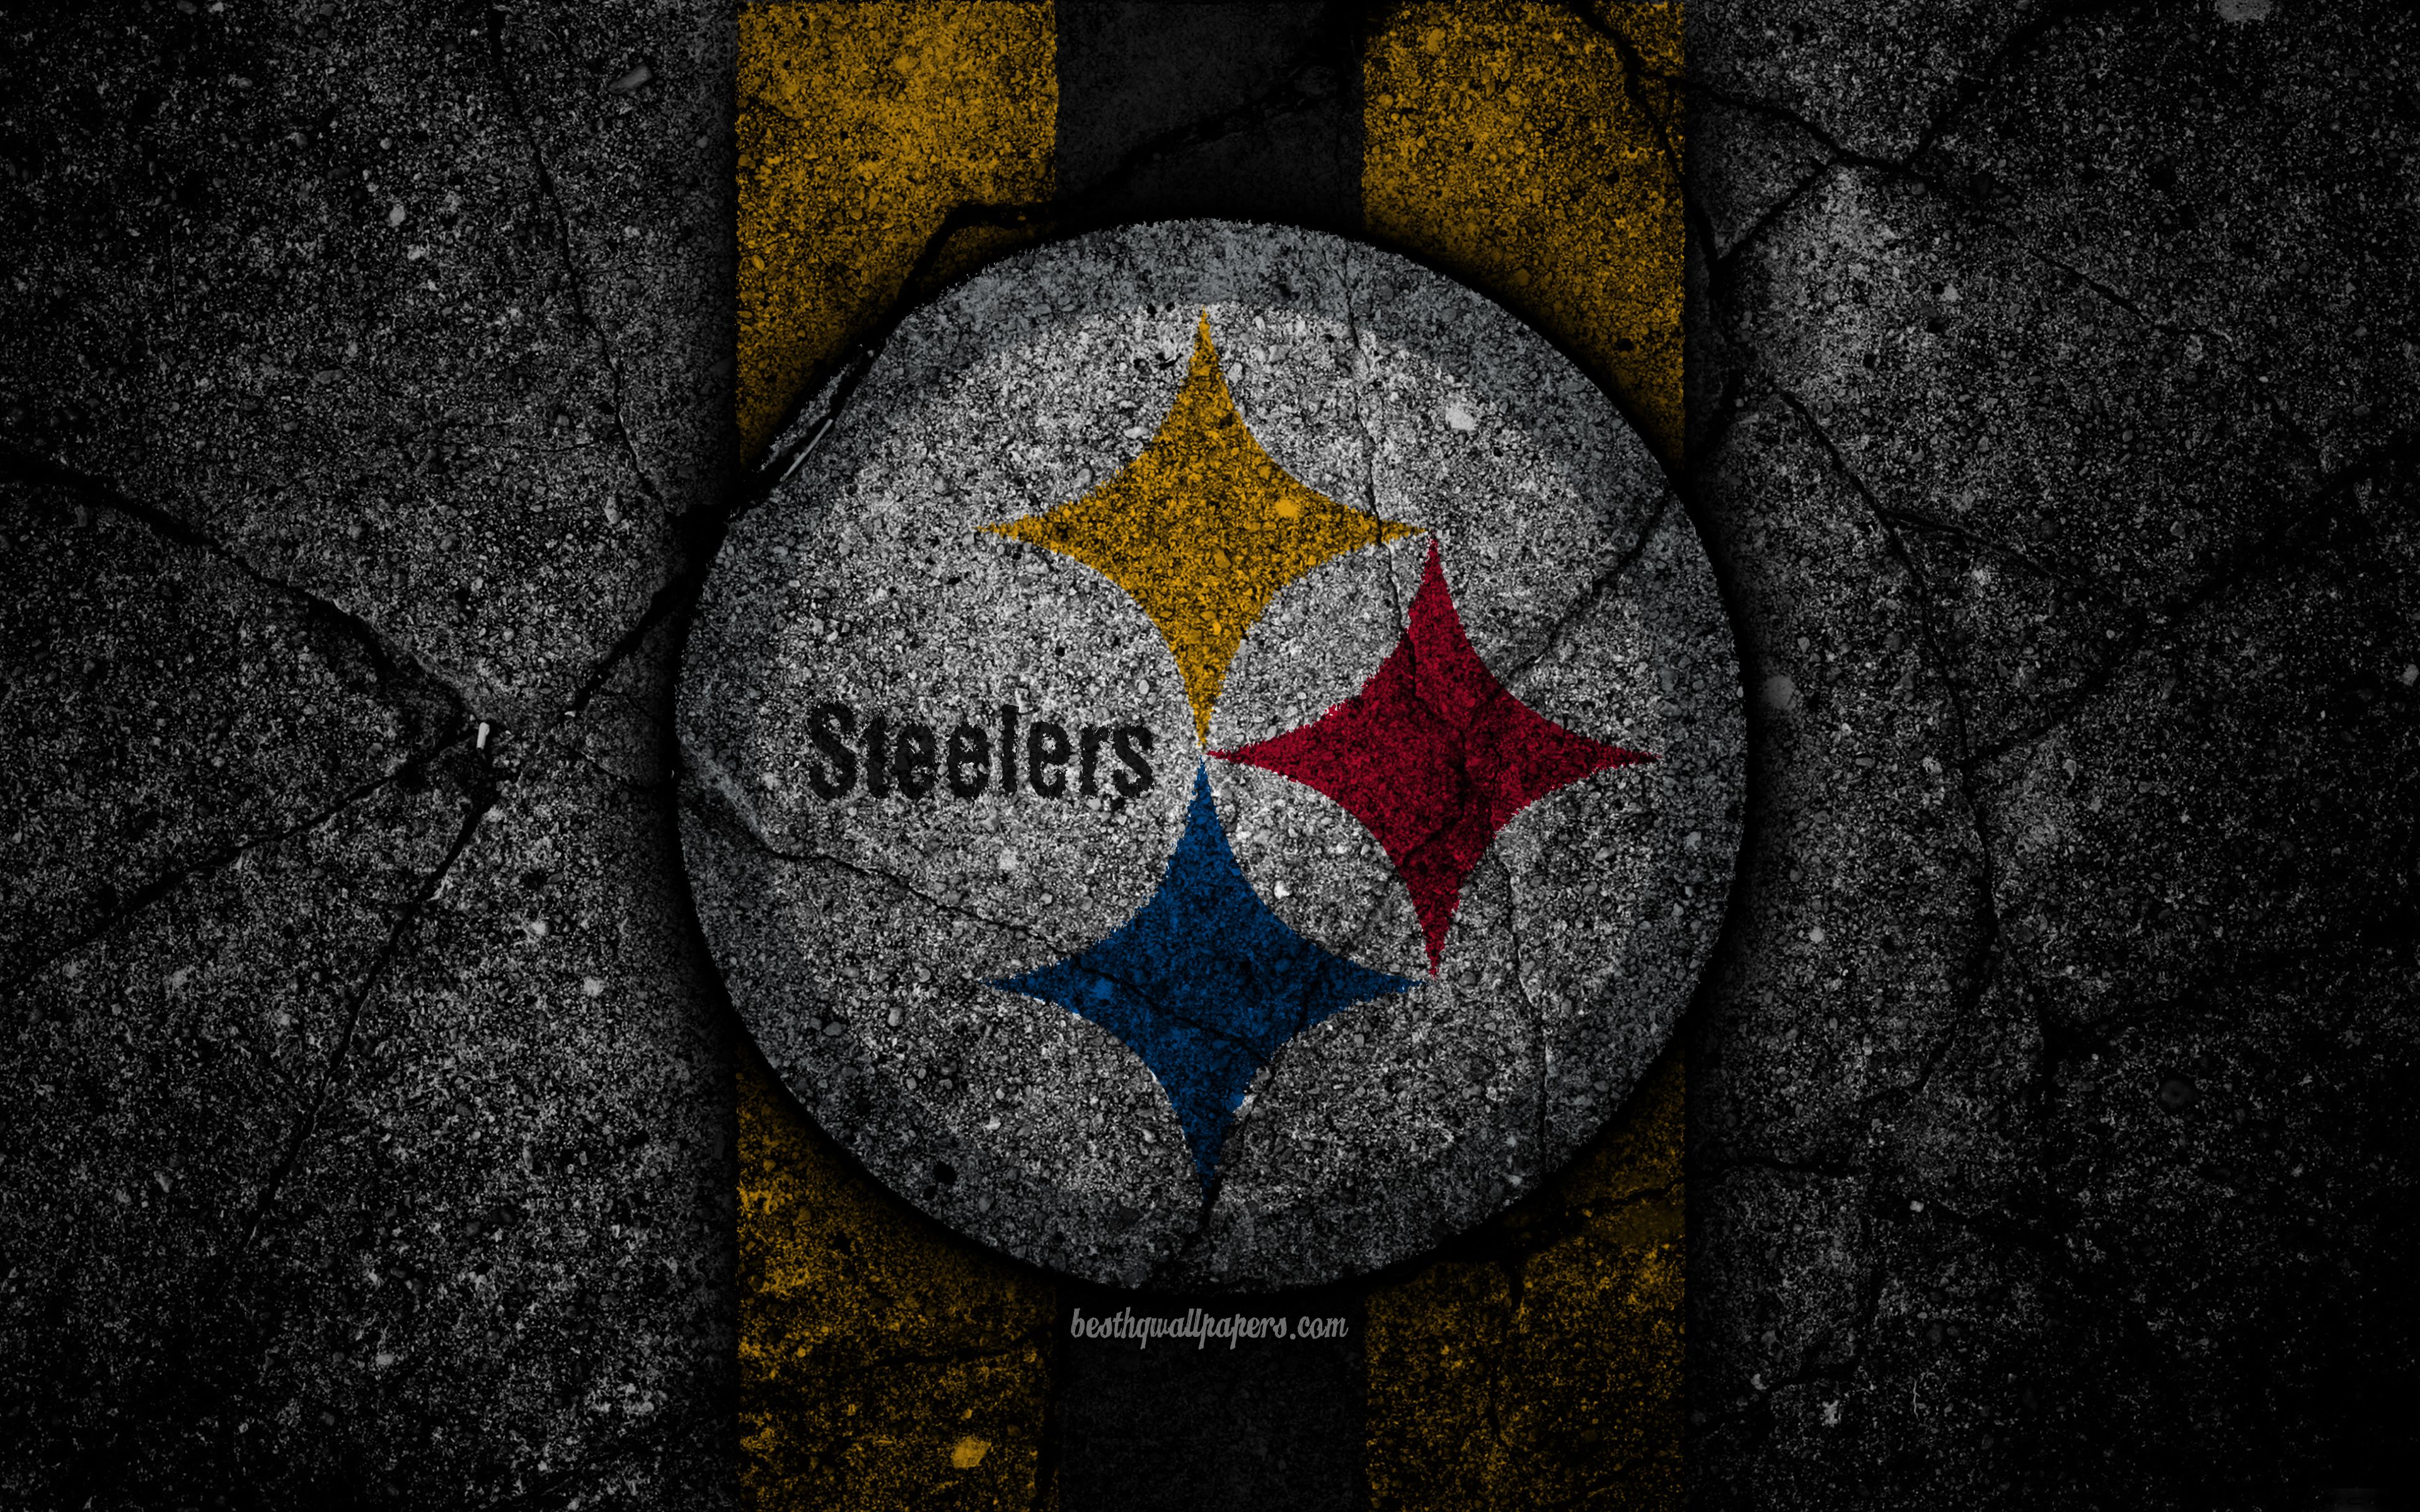 Download wallpaper 4k, Pittsburgh Steelers, logo, black stone, NFL, american football, USA, asphalt texture, National Football League, American Conference for desktop with resolution 3840x2400. High Quality HD picture wallpaper